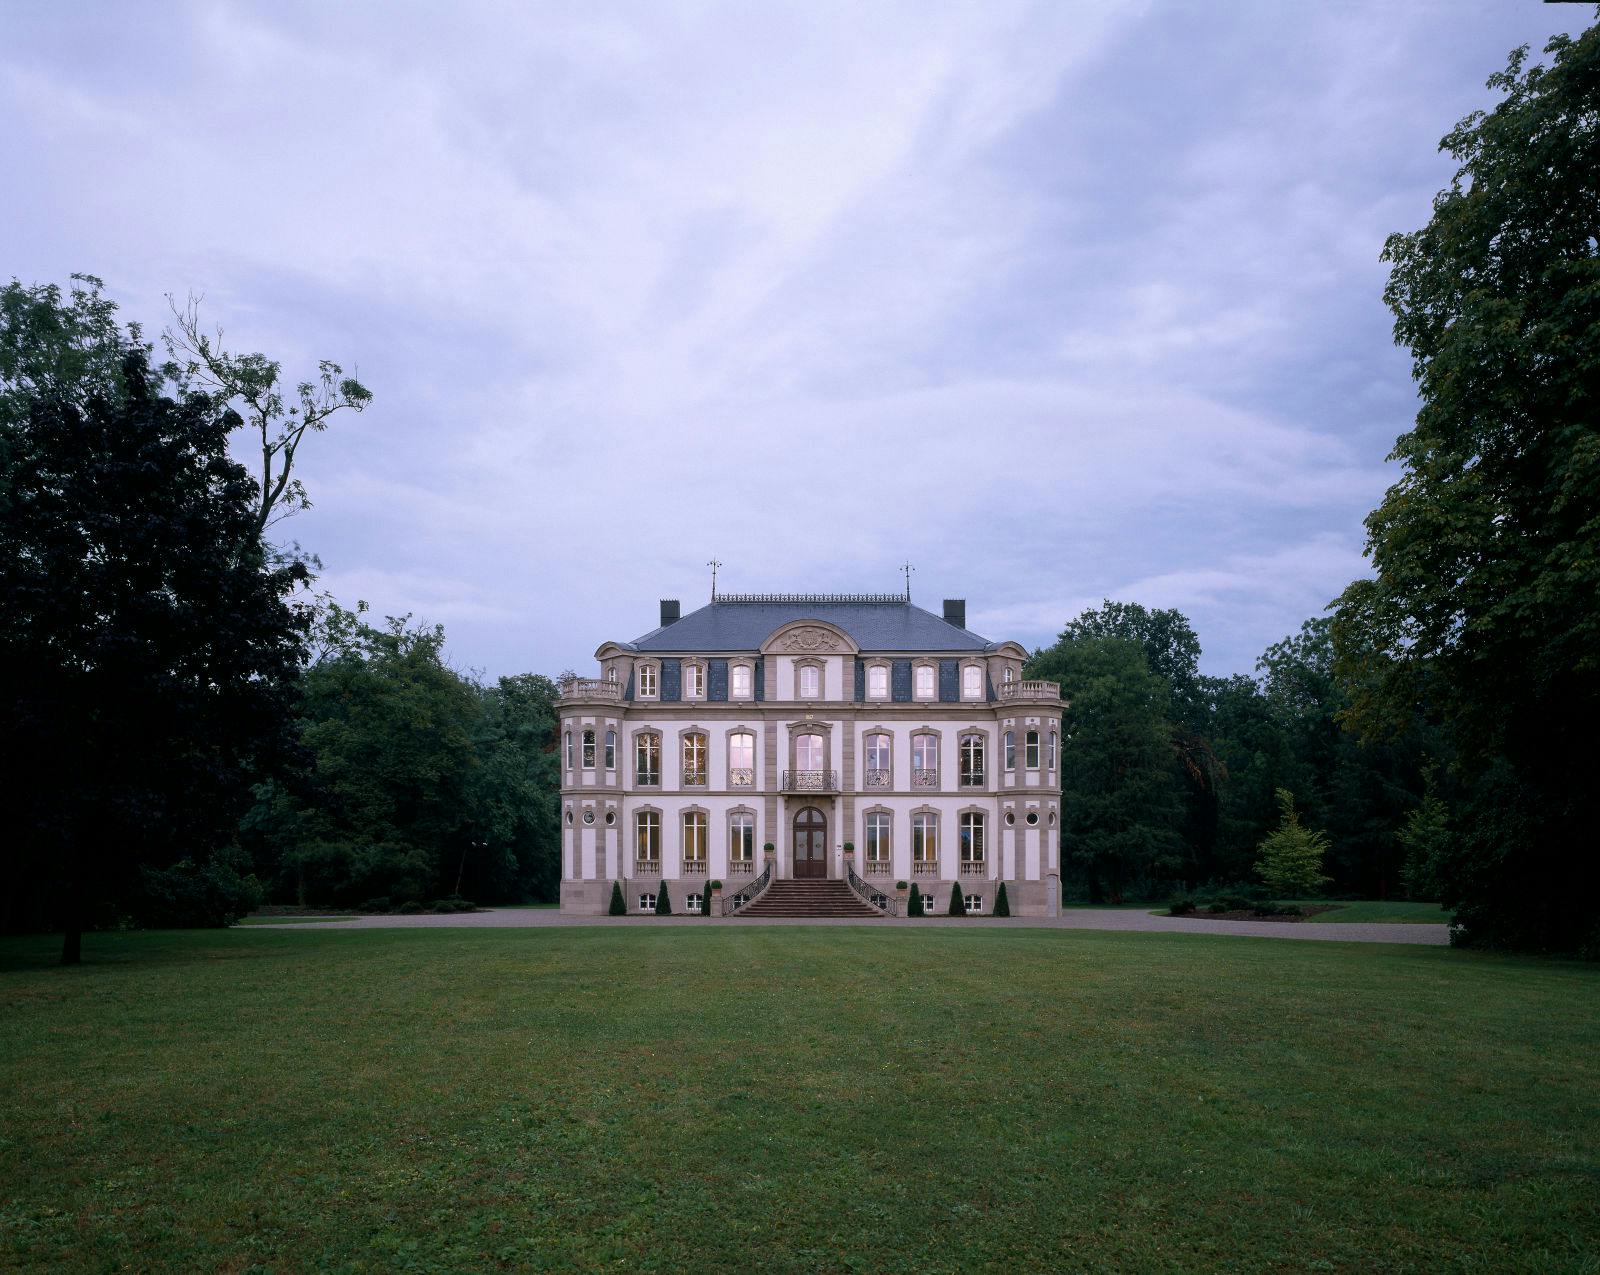 The Château St. Jean is surrounded by a six hectare park